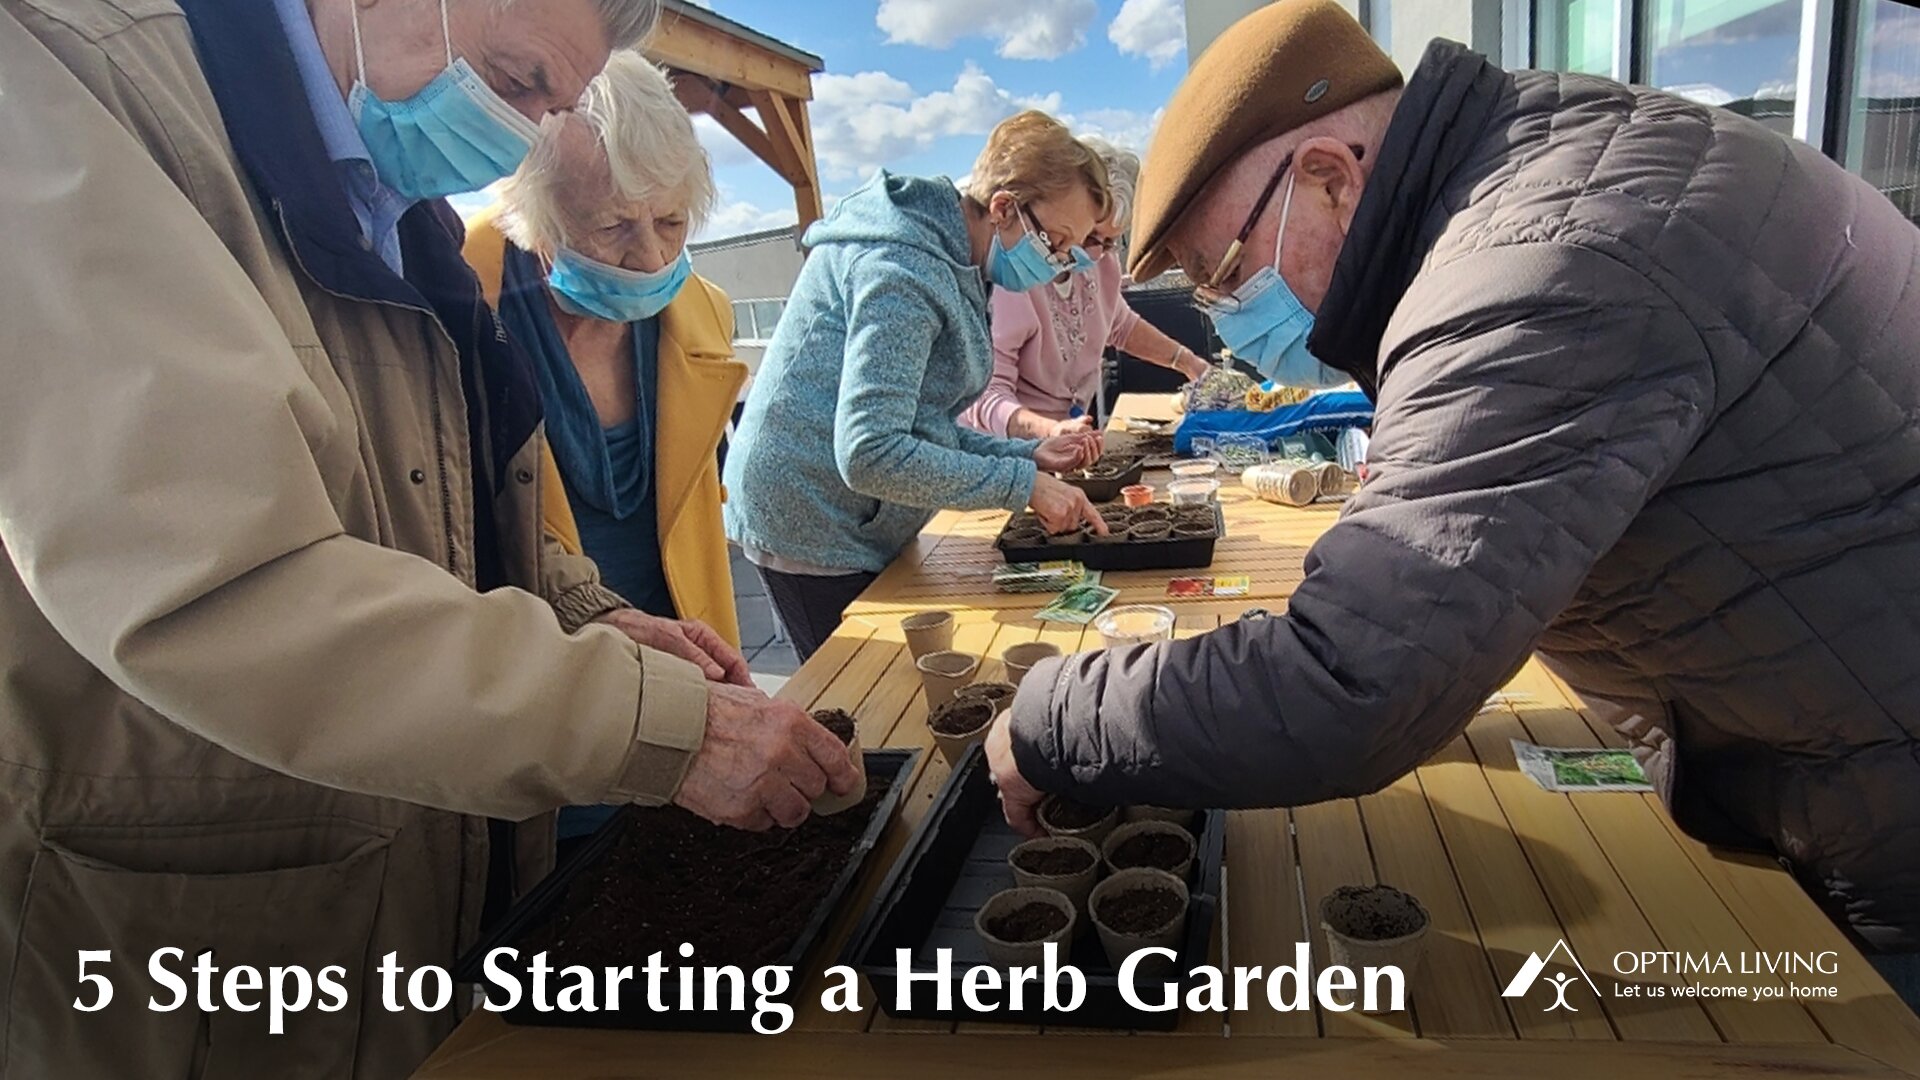 A gathering of men and women planting herbs in the garden a fun activity for seniors